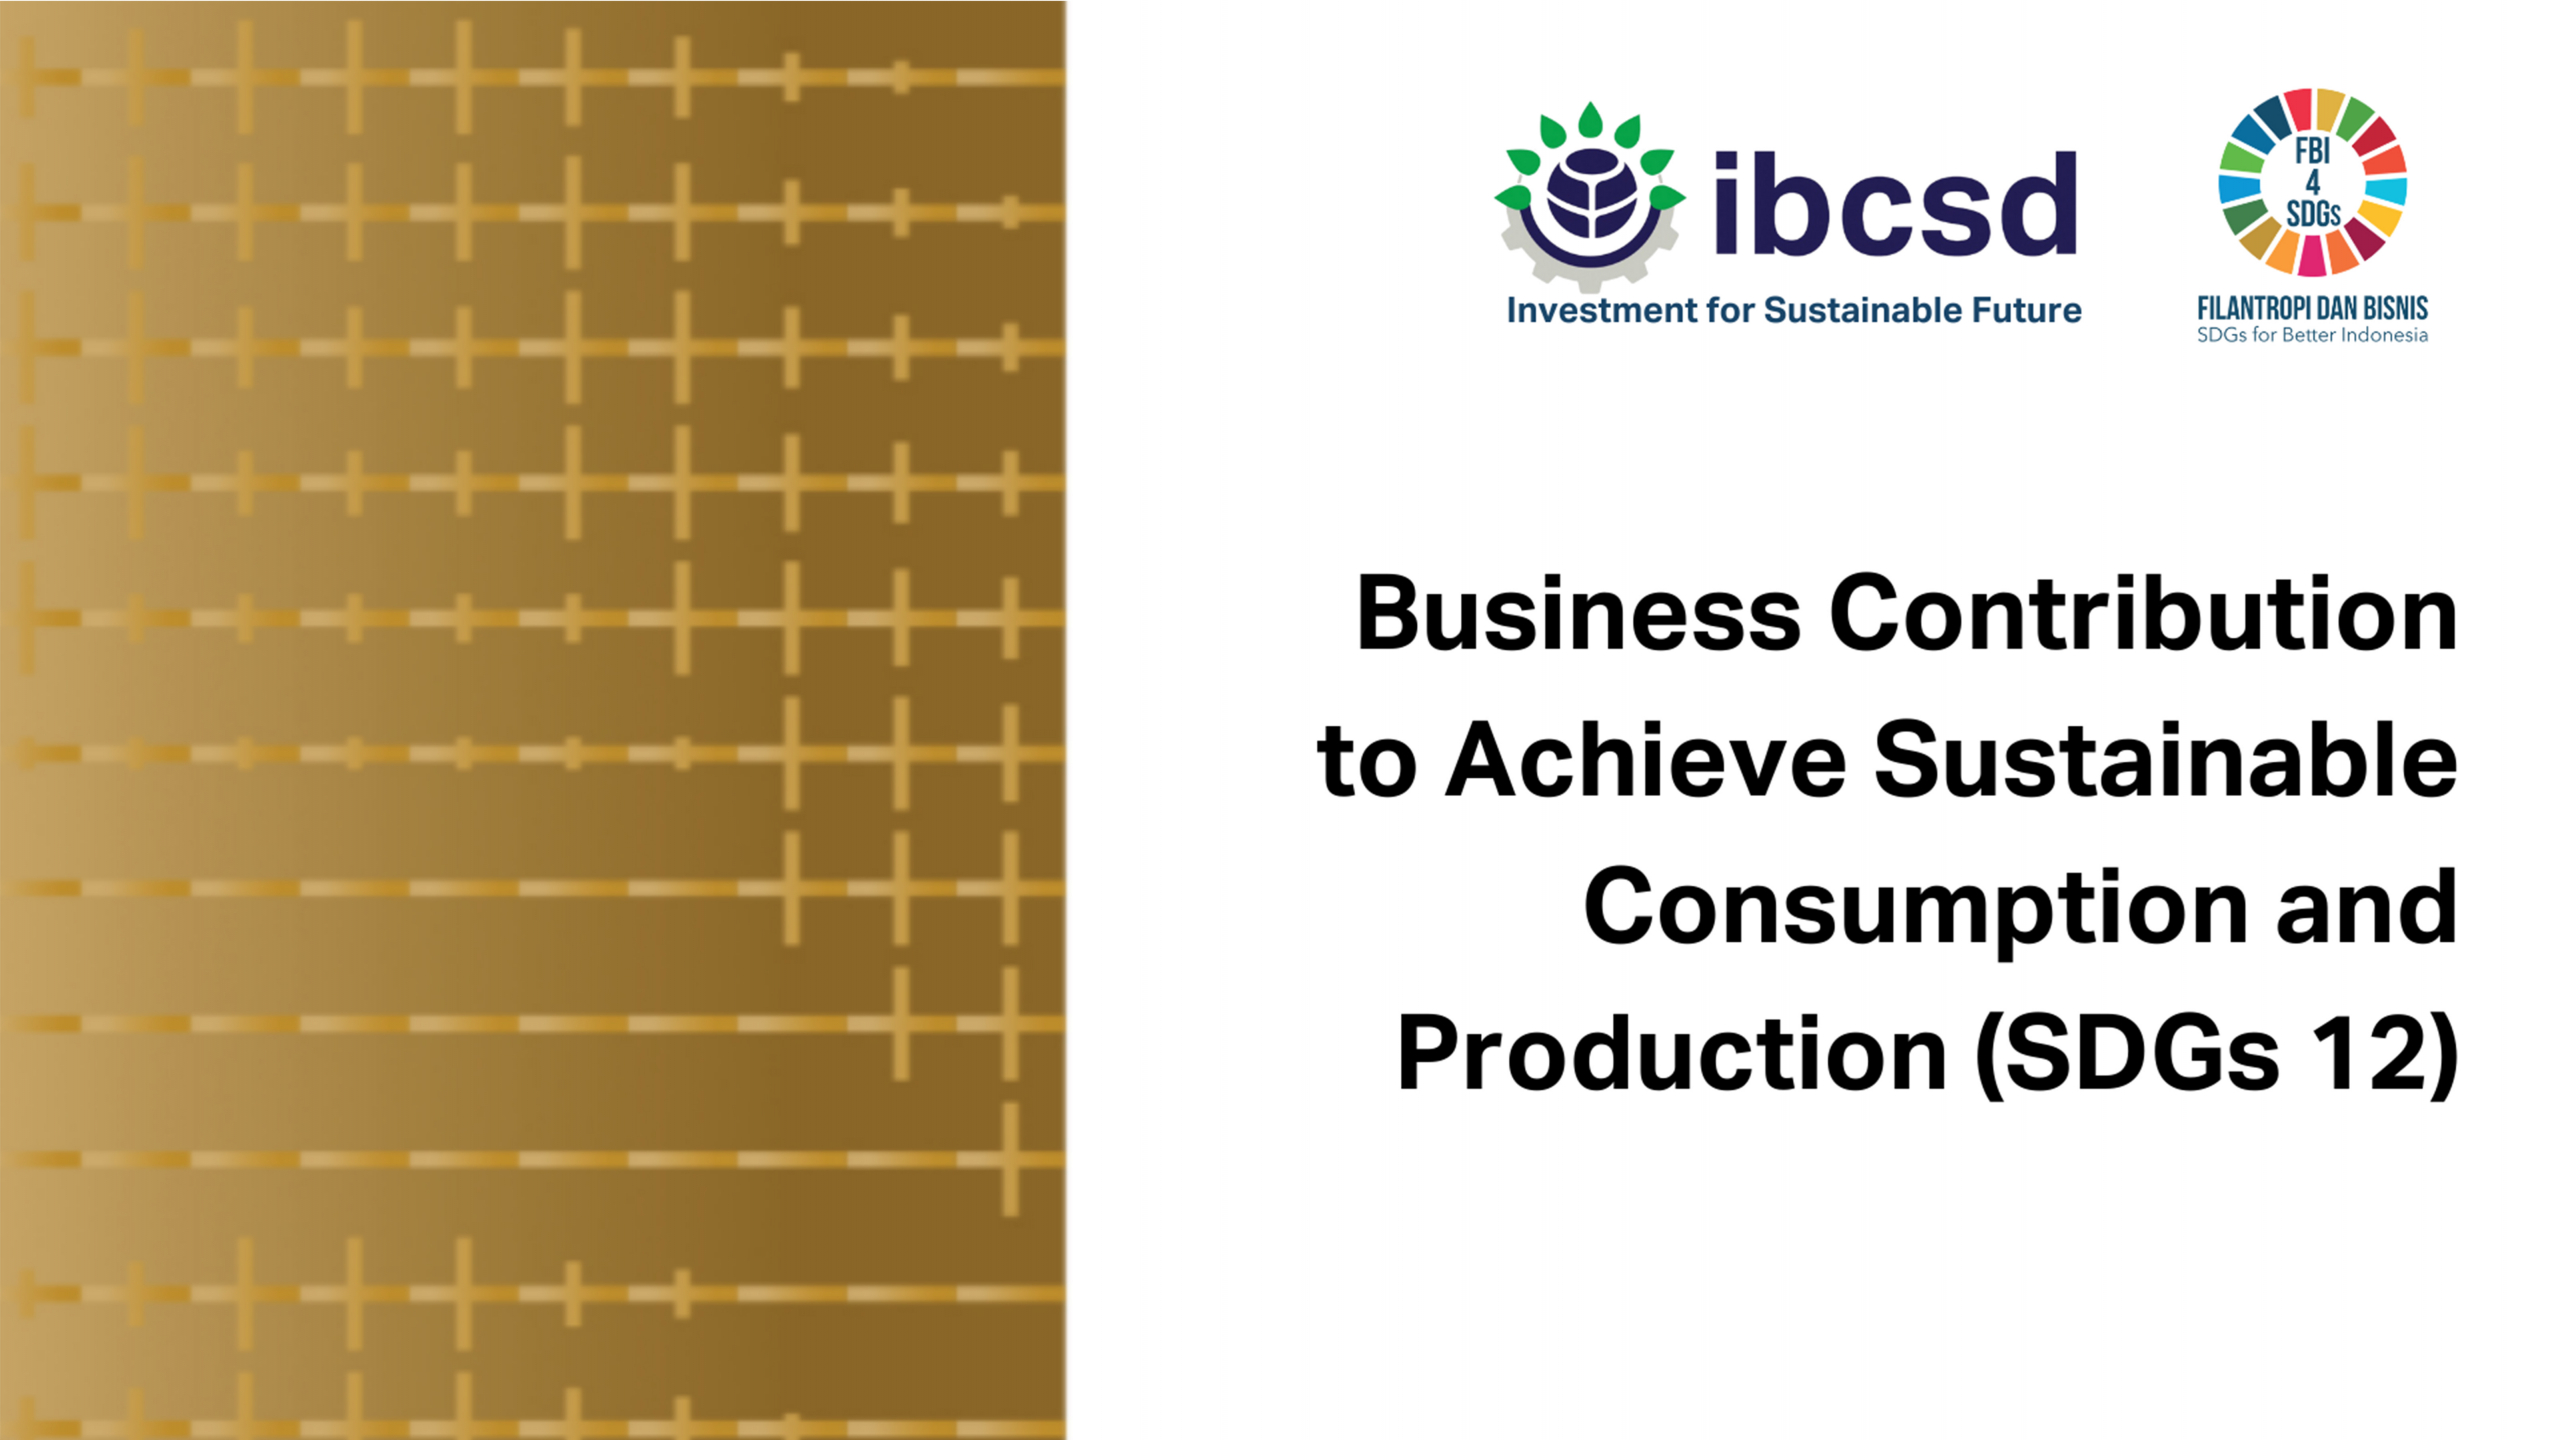 IBCSD Launches Book on the Business Contribution to Achieve Sustainable Consumption and Production (SDGs 12)